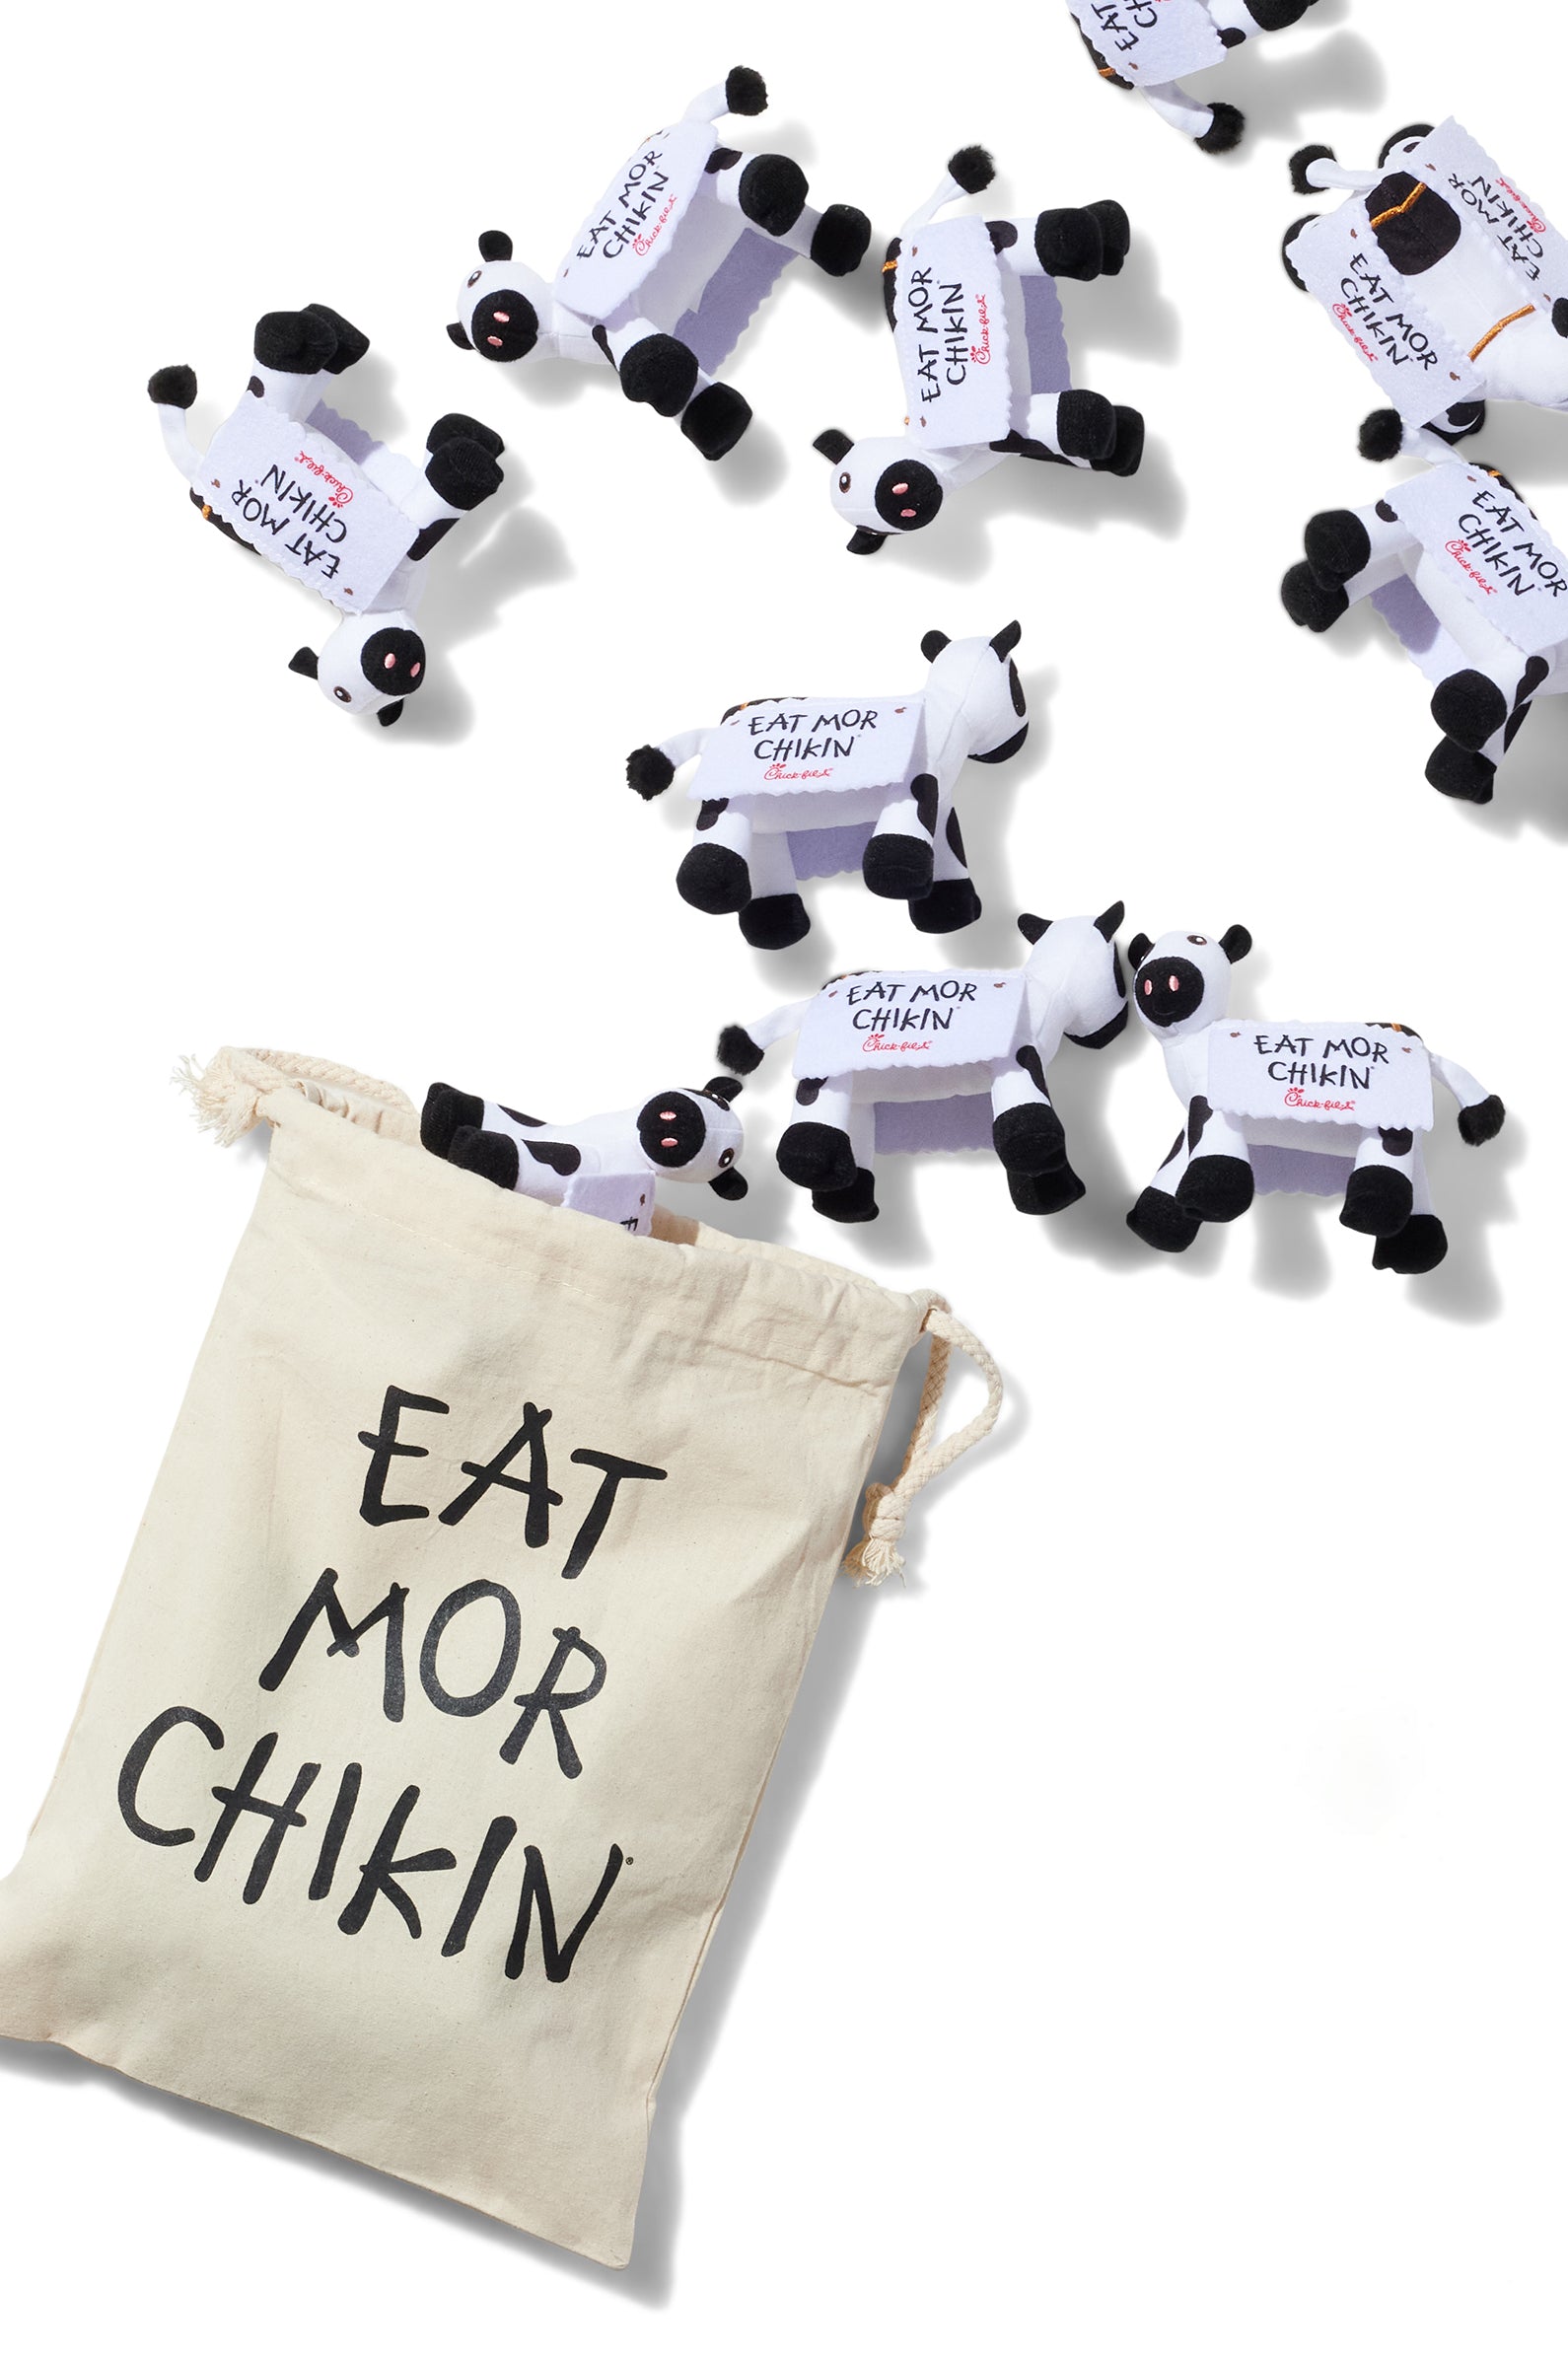 Several mini plush cows with a bag displaying their "Eat Mor Chikin" message from the Shareable Bag of Cows set